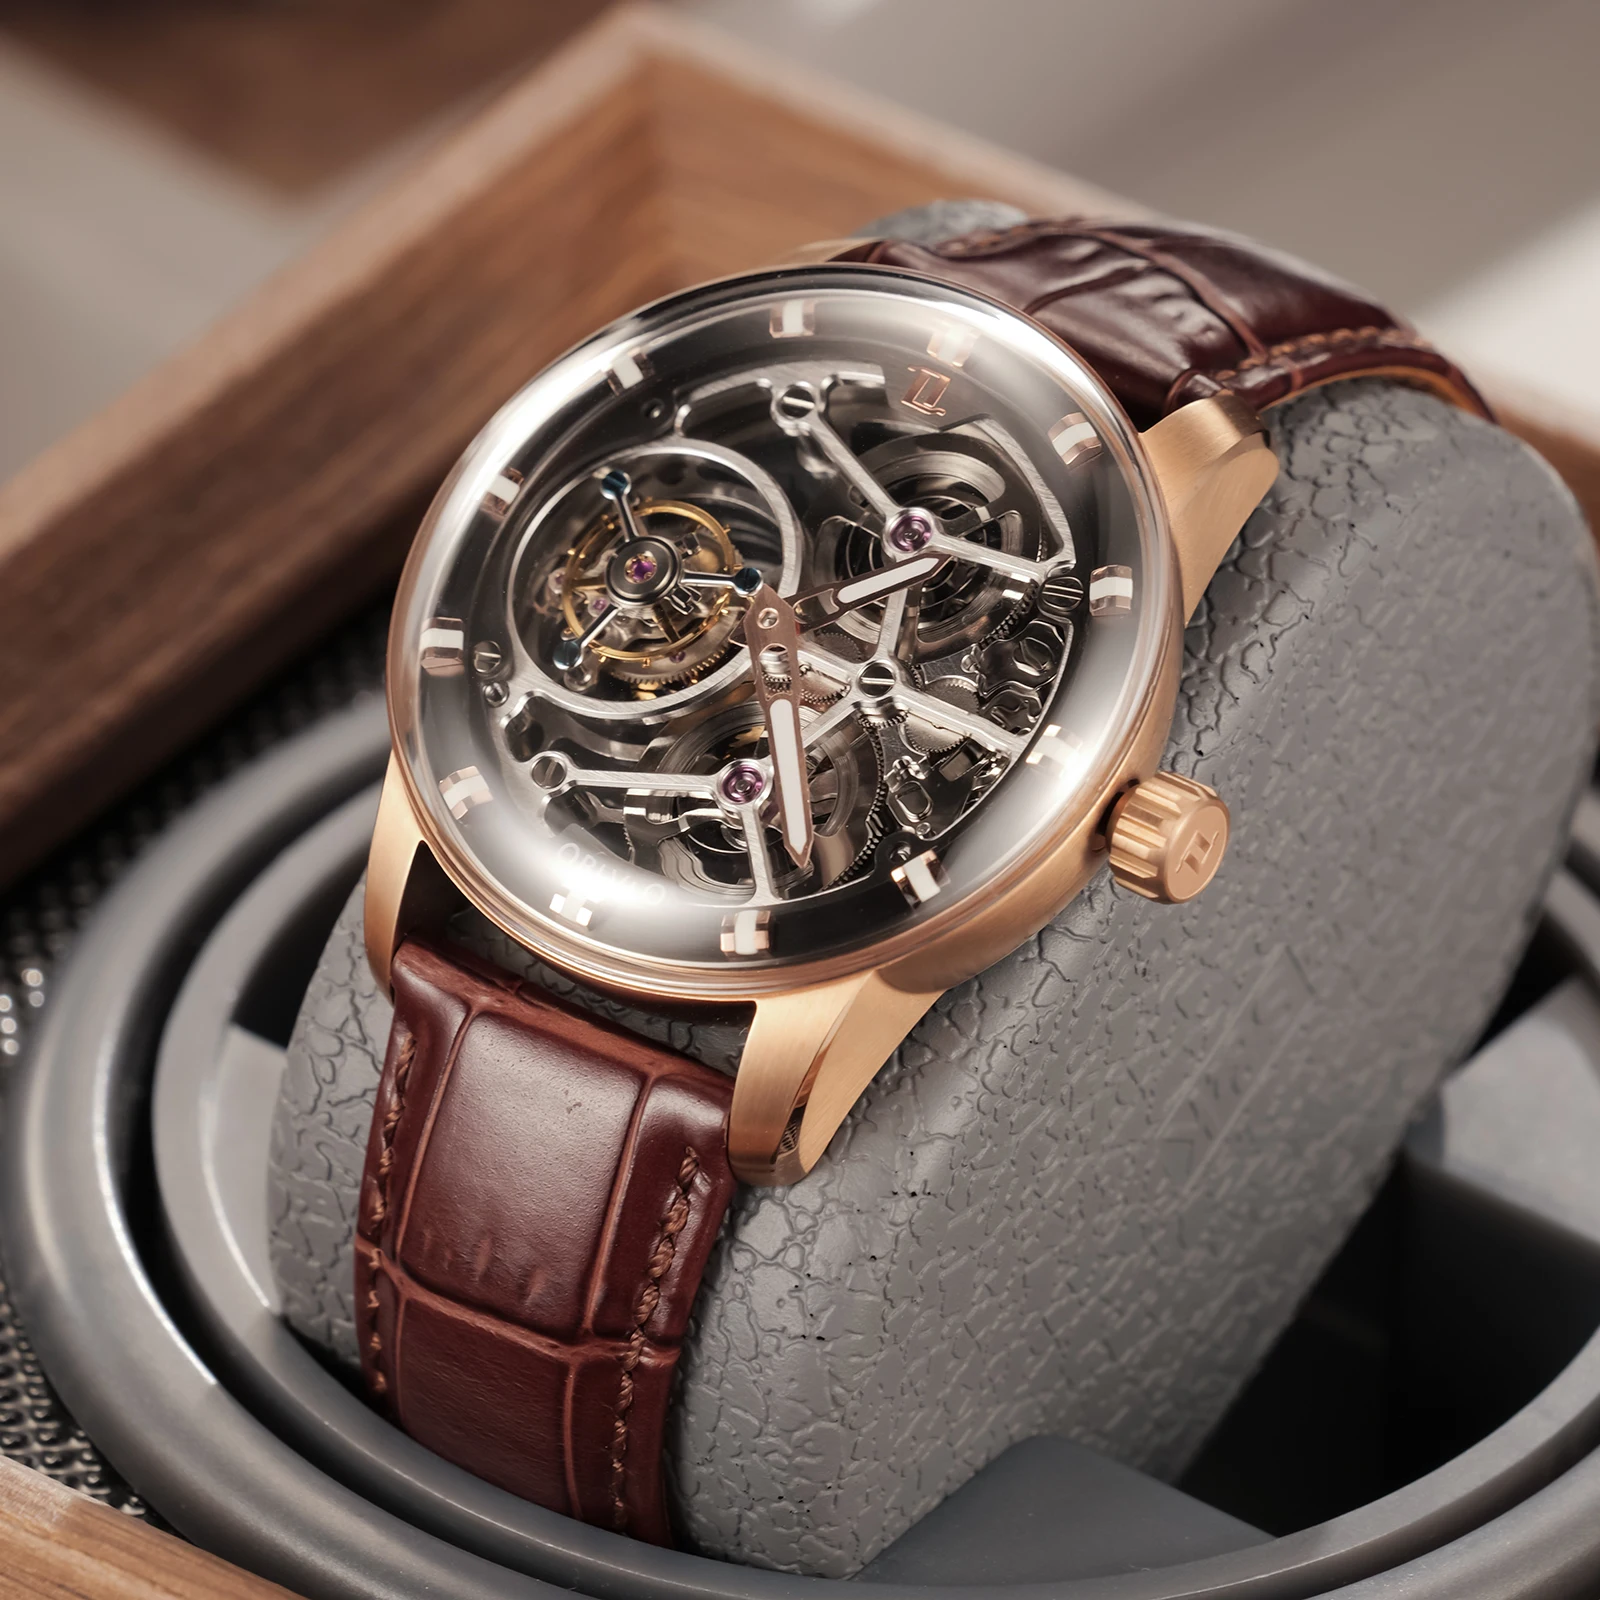 

OBLVLO Men Mechanical Watches Genuine Leather Rose Gold Case Skeleton Dial Tourbillon Transparent Manual-Wind Watches IM-SK-TB